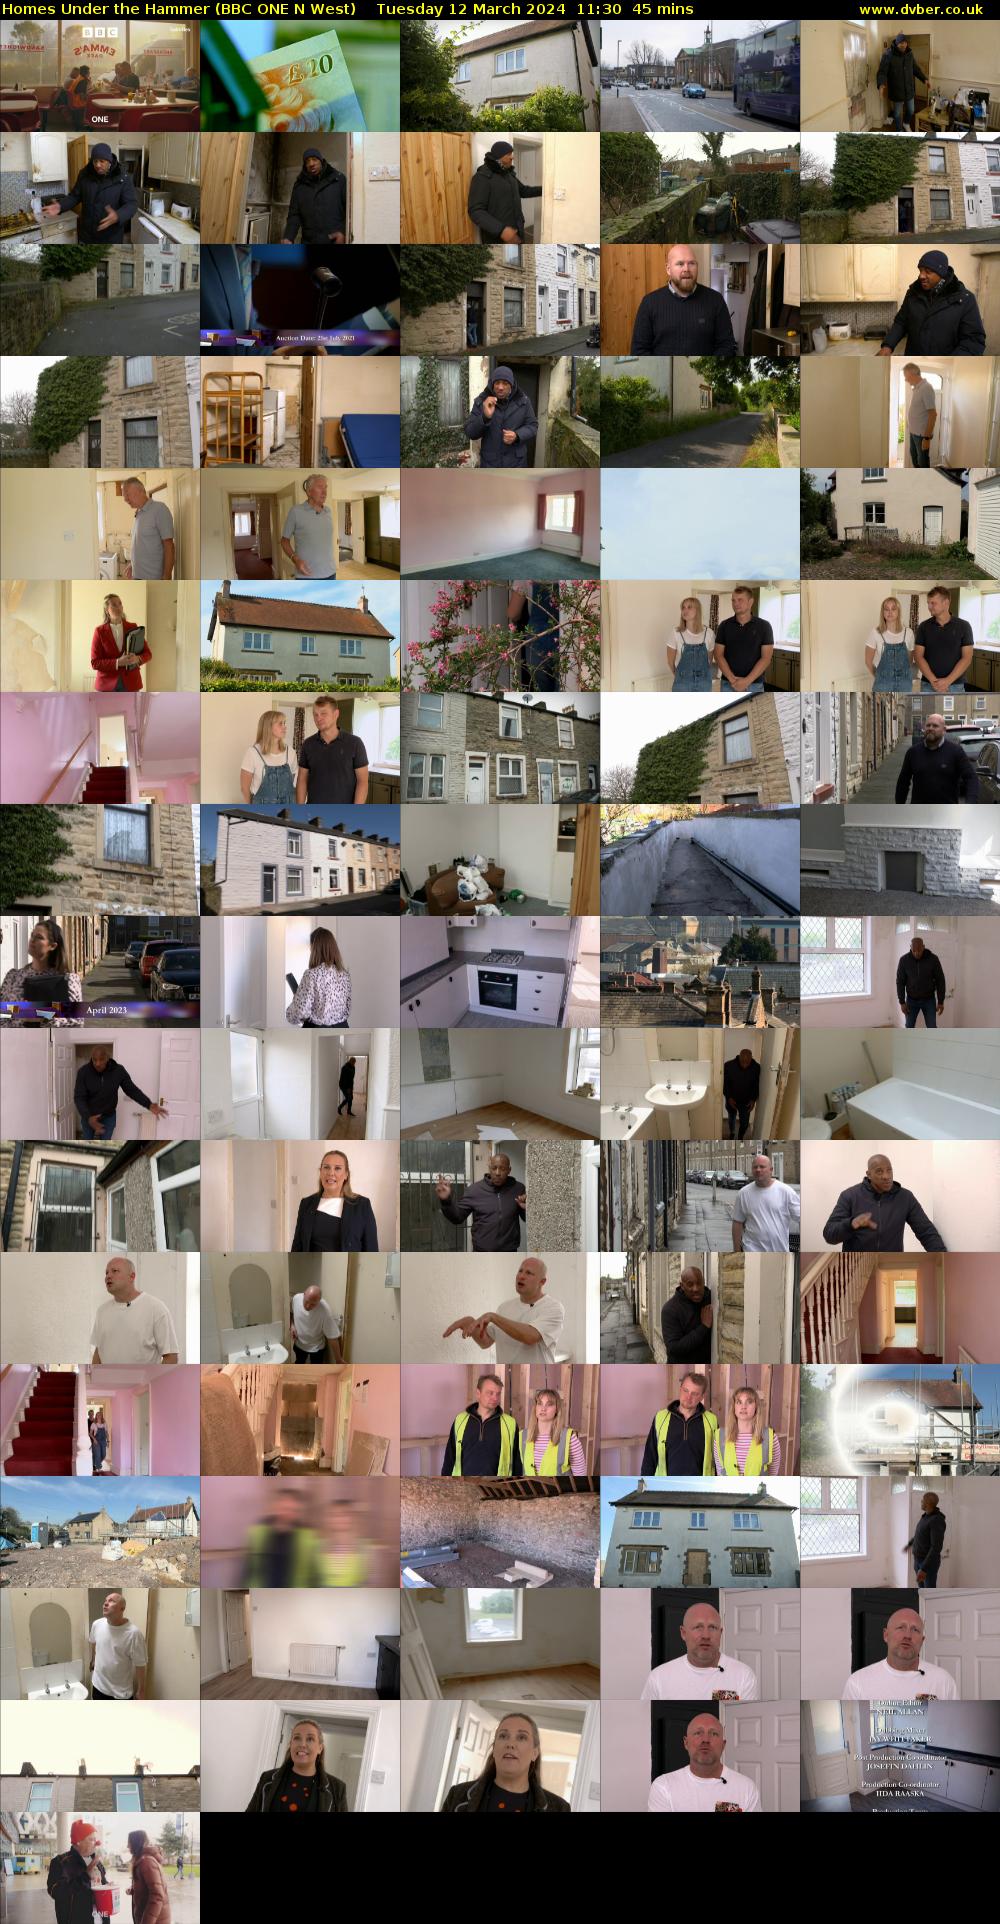 Homes Under the Hammer (BBC ONE N West) Tuesday 12 March 2024 11:30 - 12:15